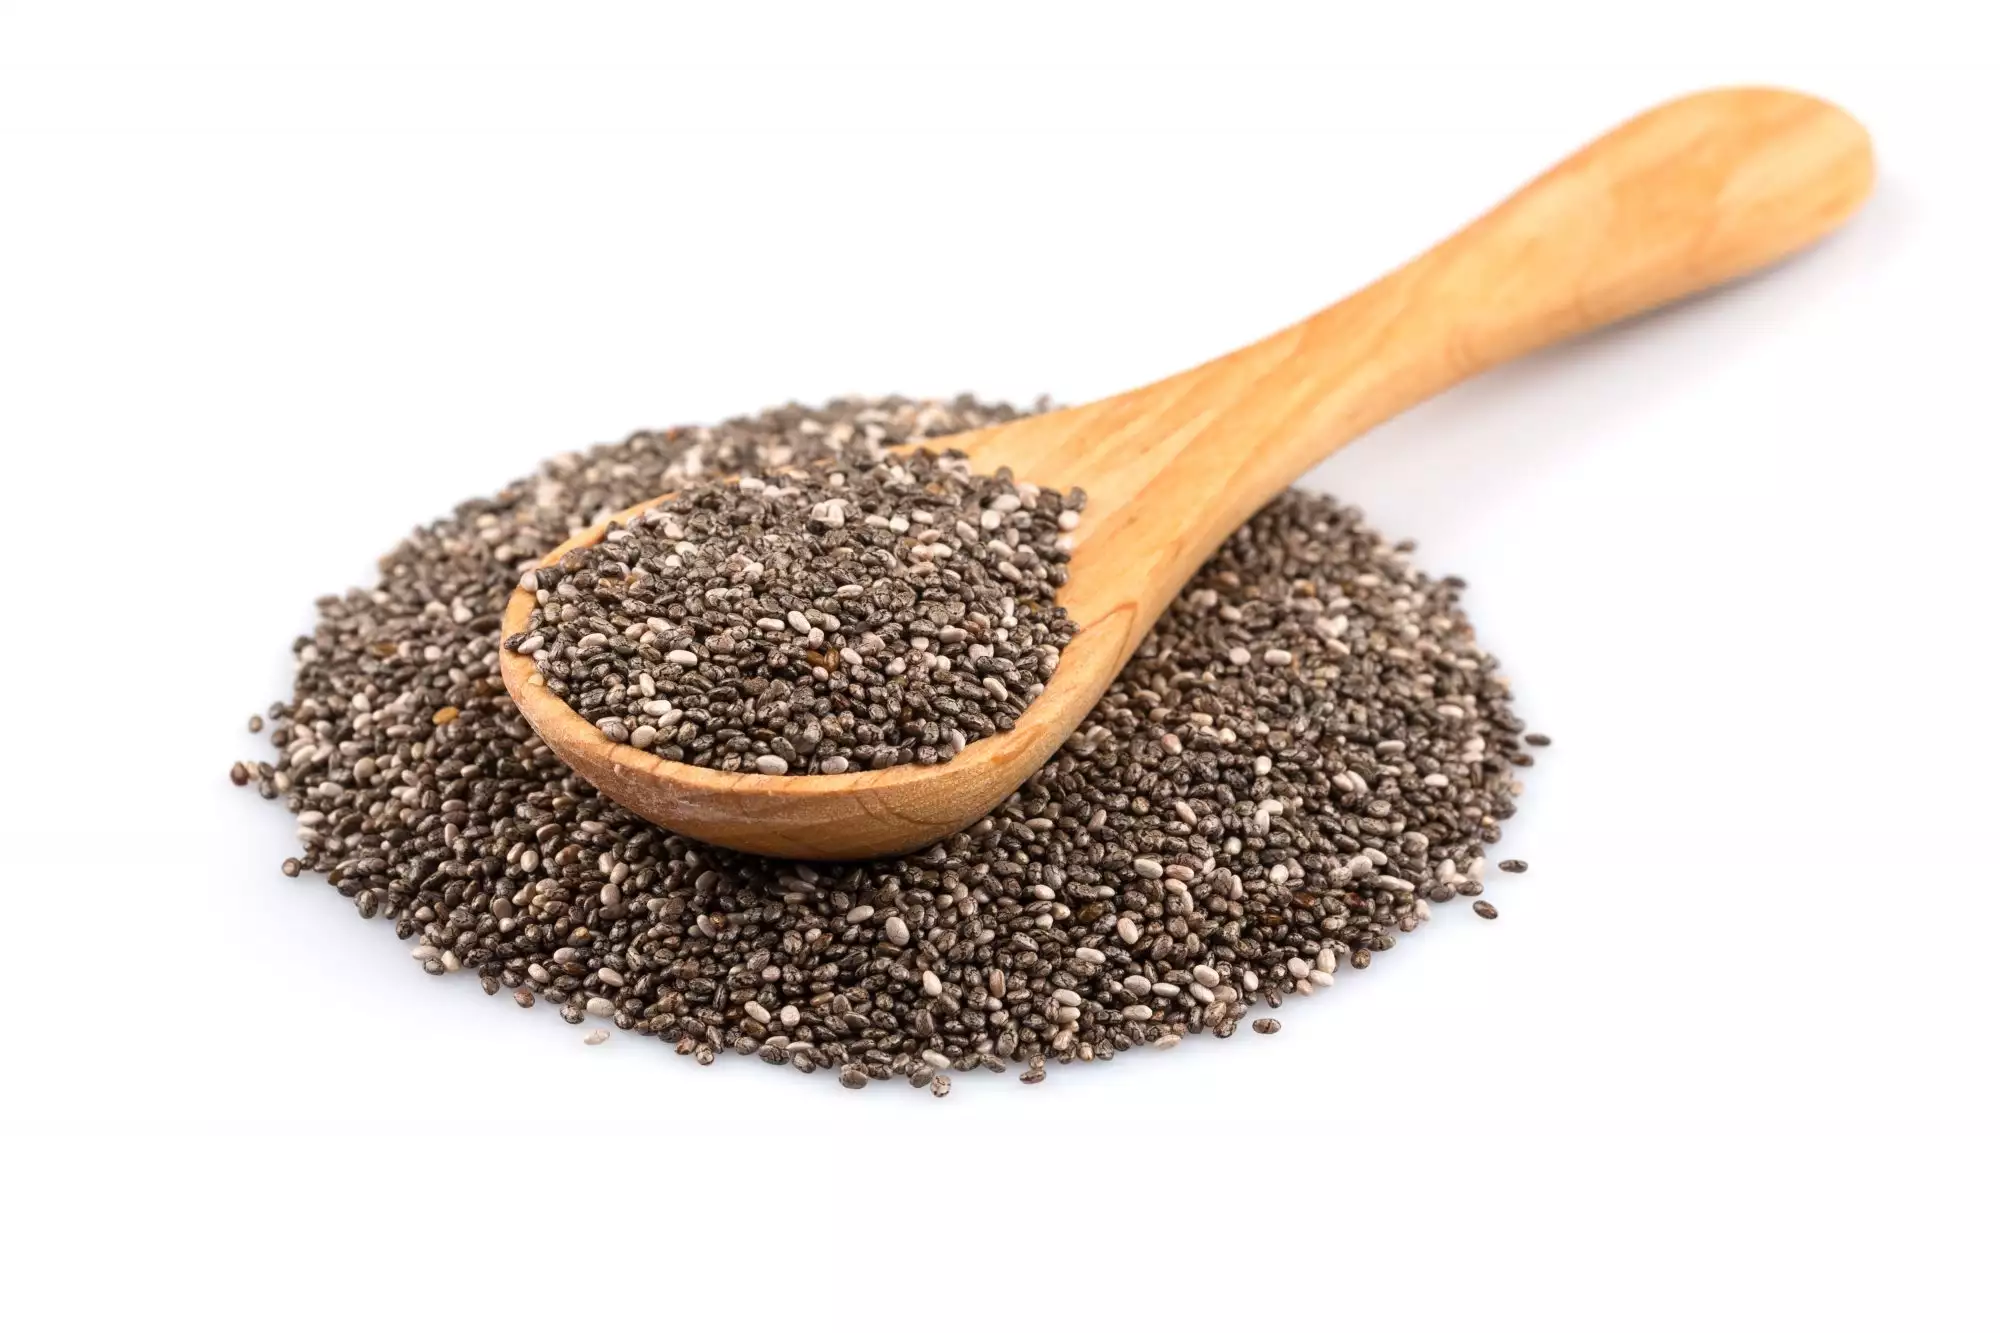 How Much Protein Does Chia Seeds Have